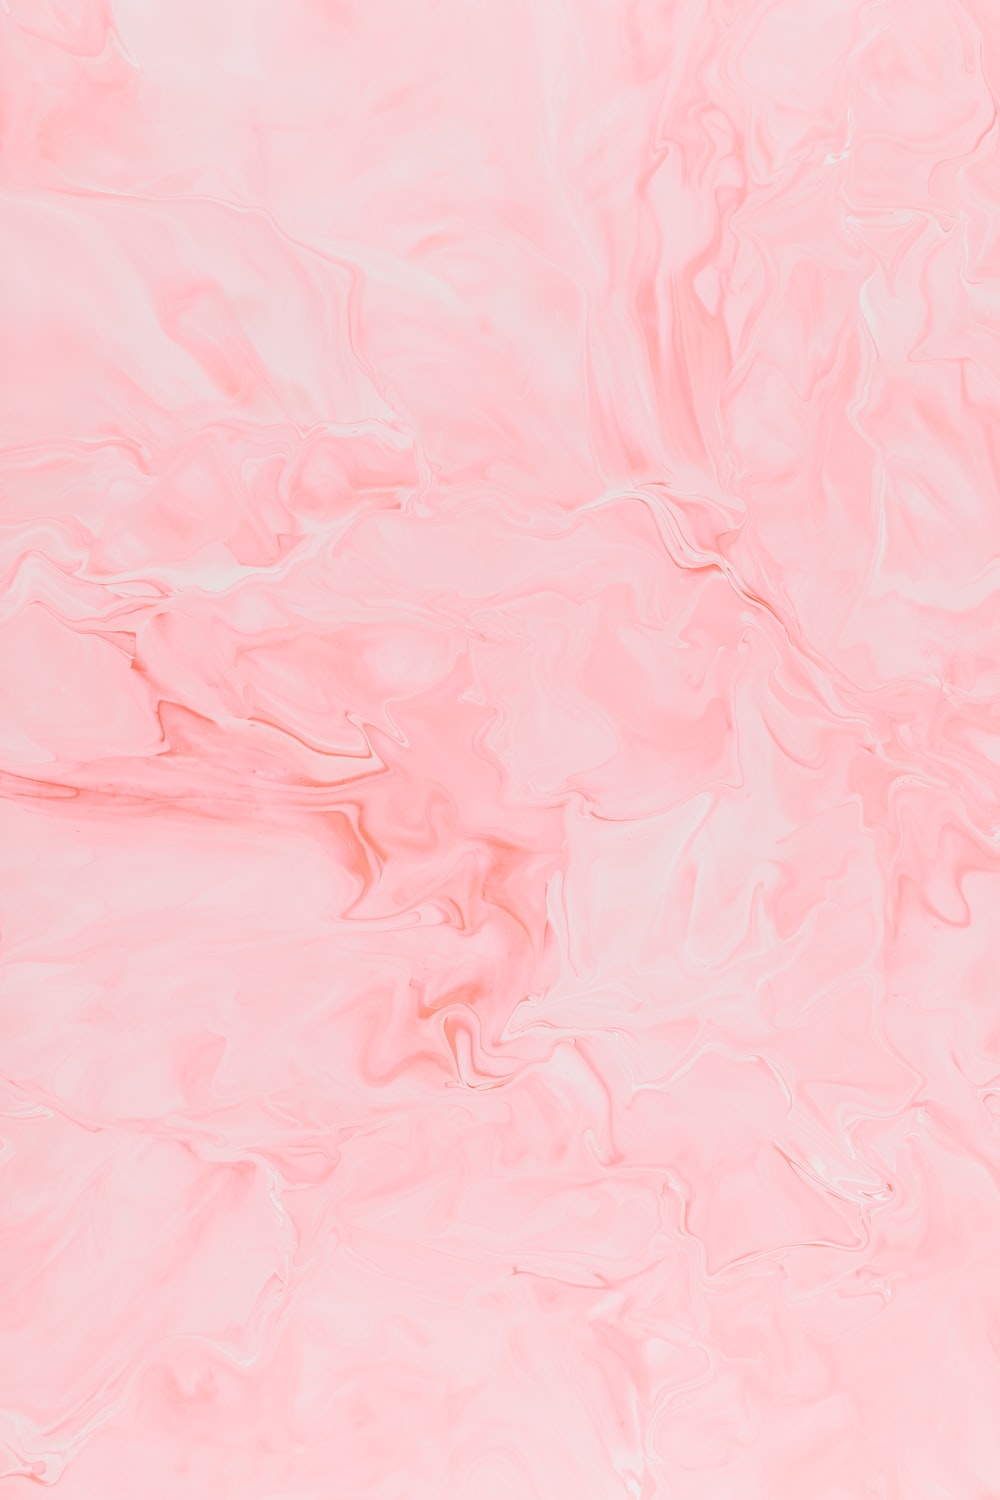 1K+ Pink Marble Picture. Download Free Image